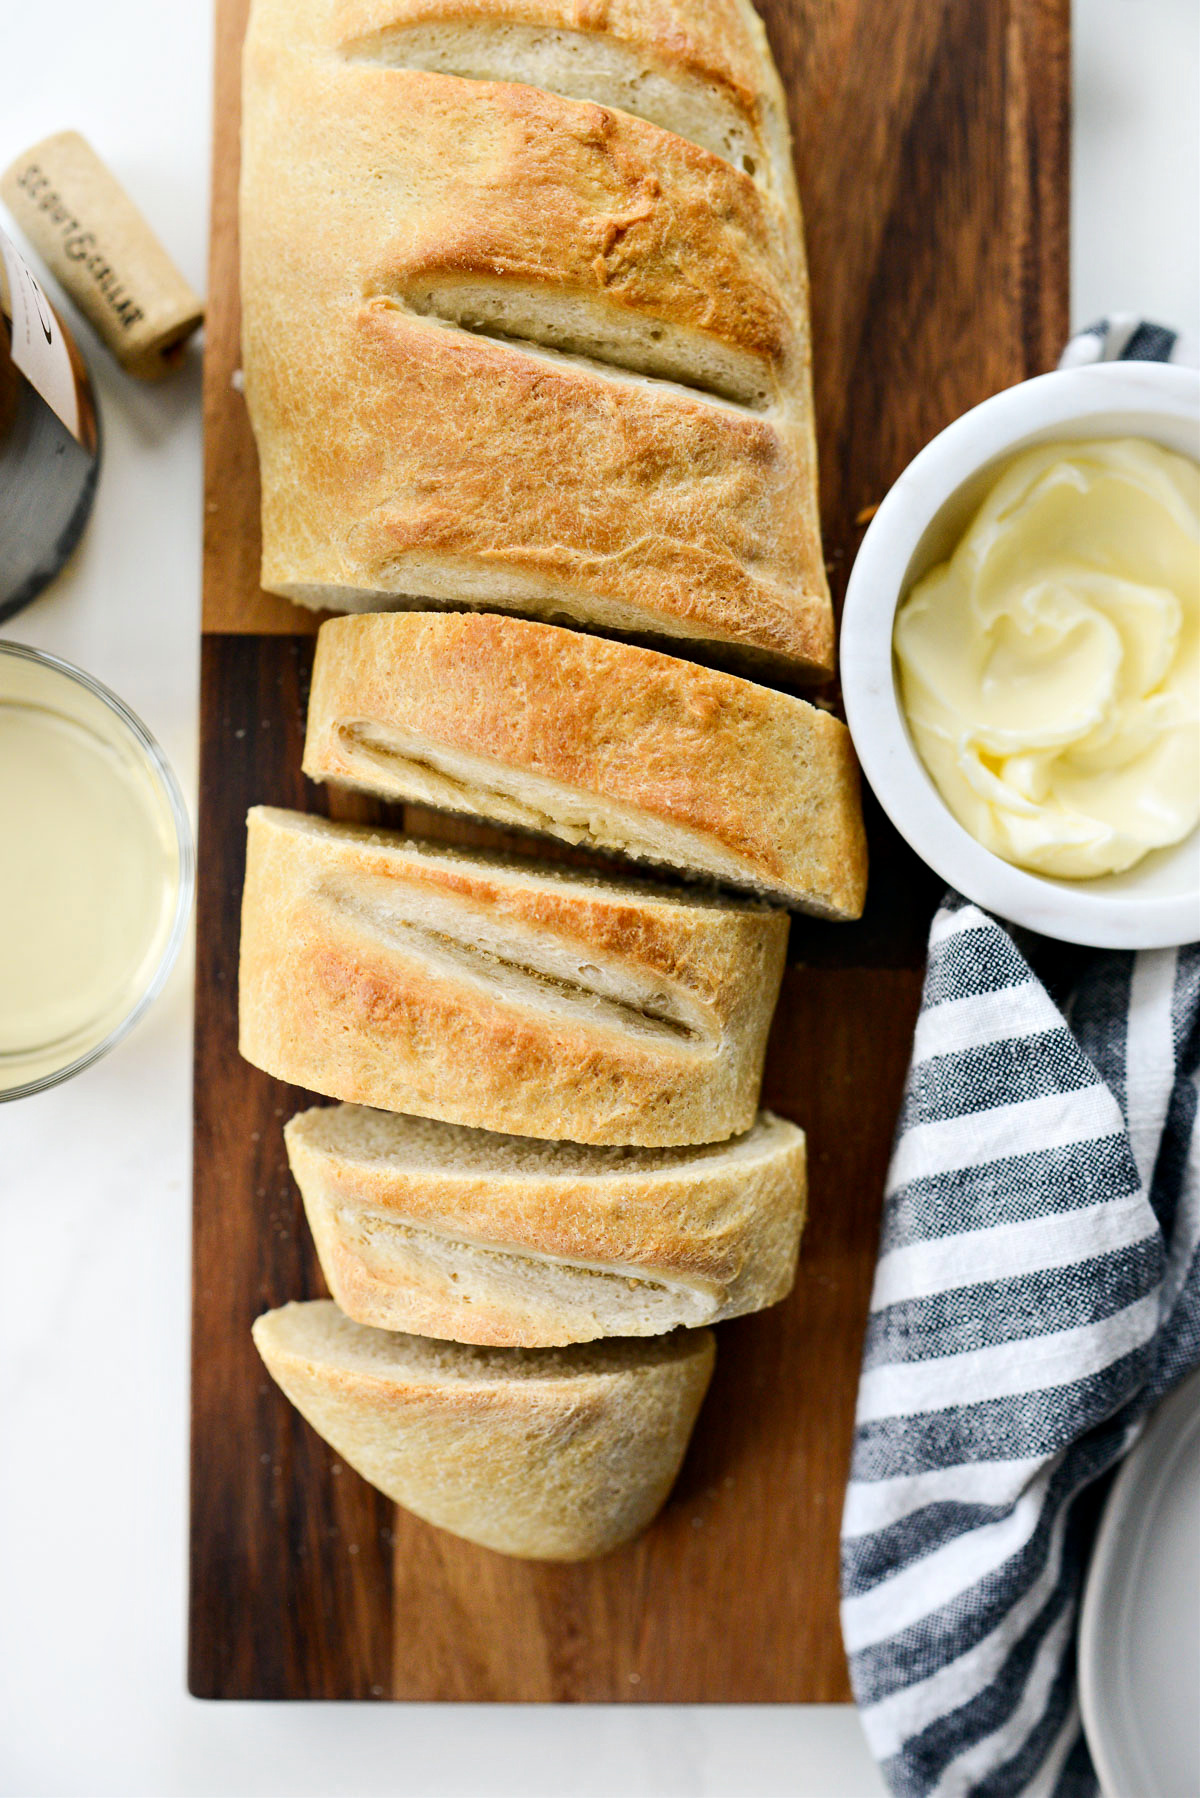 Easy French bread with the Sifter and Scale, Recipe